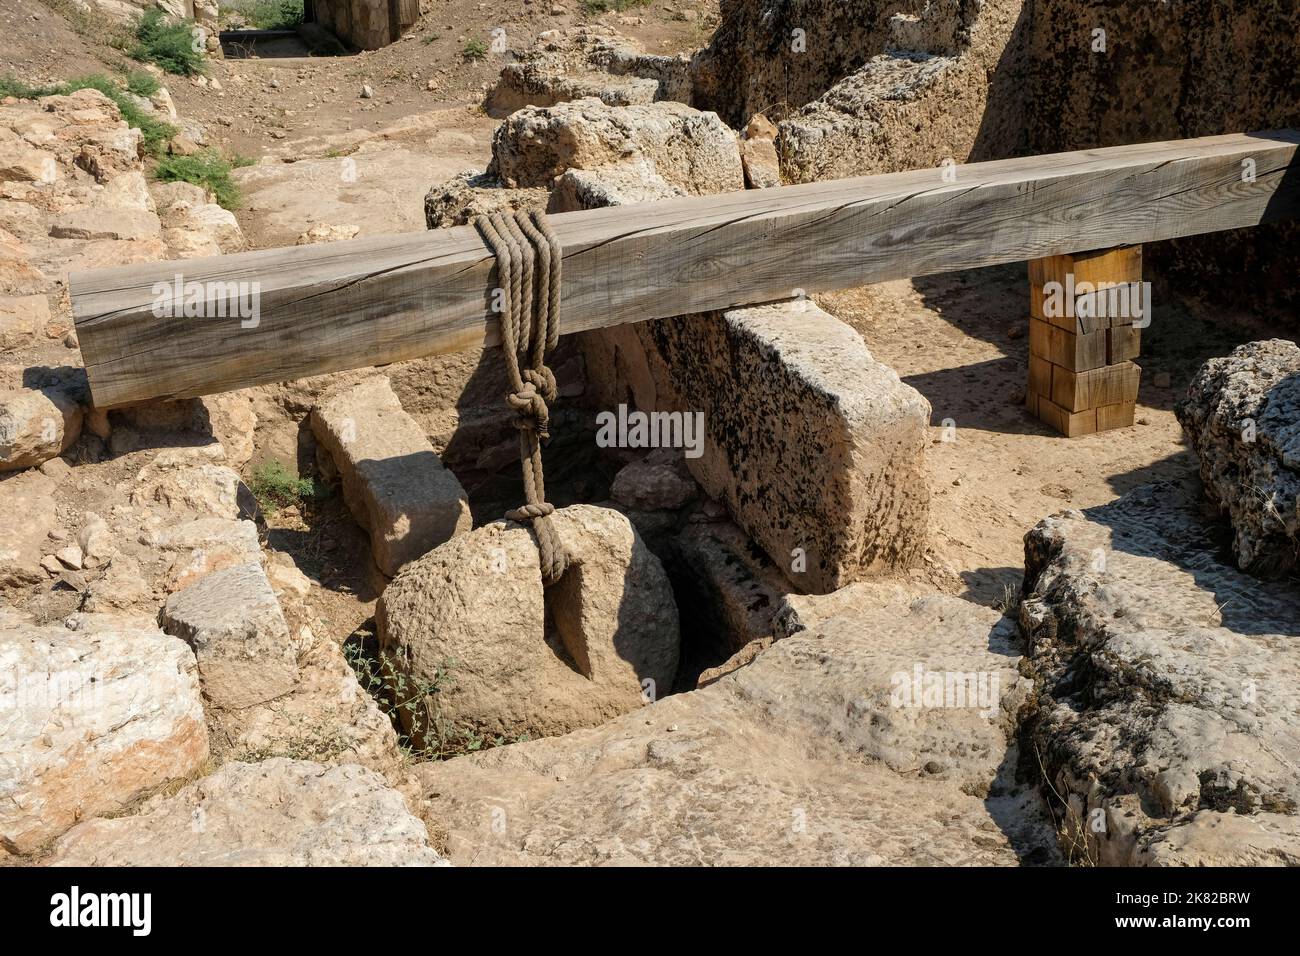 Ruins of ancient Perre, small town of Commagene Kingdomand later important local center of Roman Empire. Stock Photo